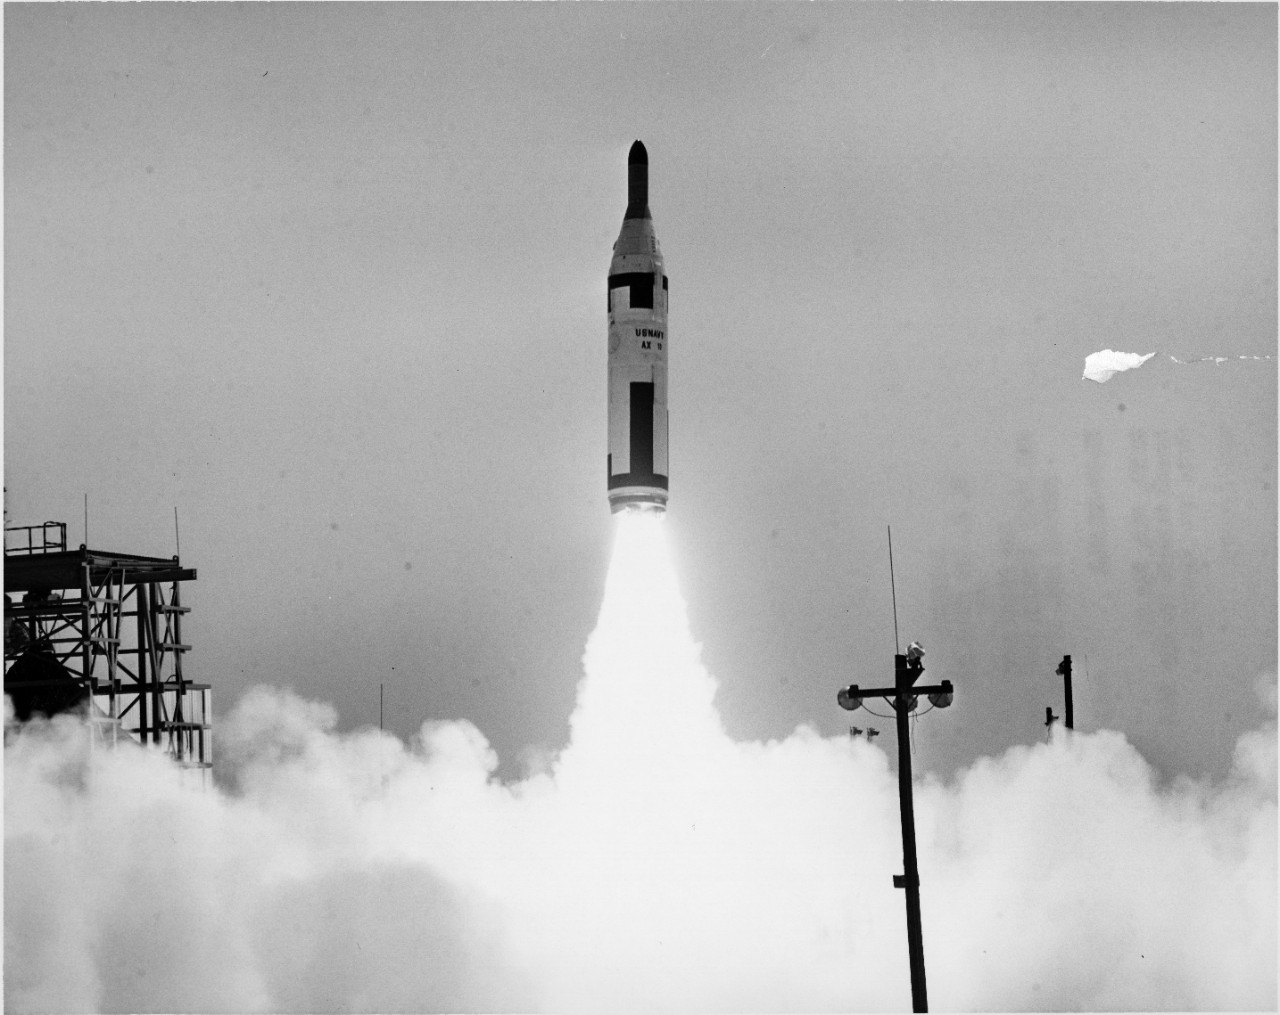 Polaris missile lifts off in cloud of smoke